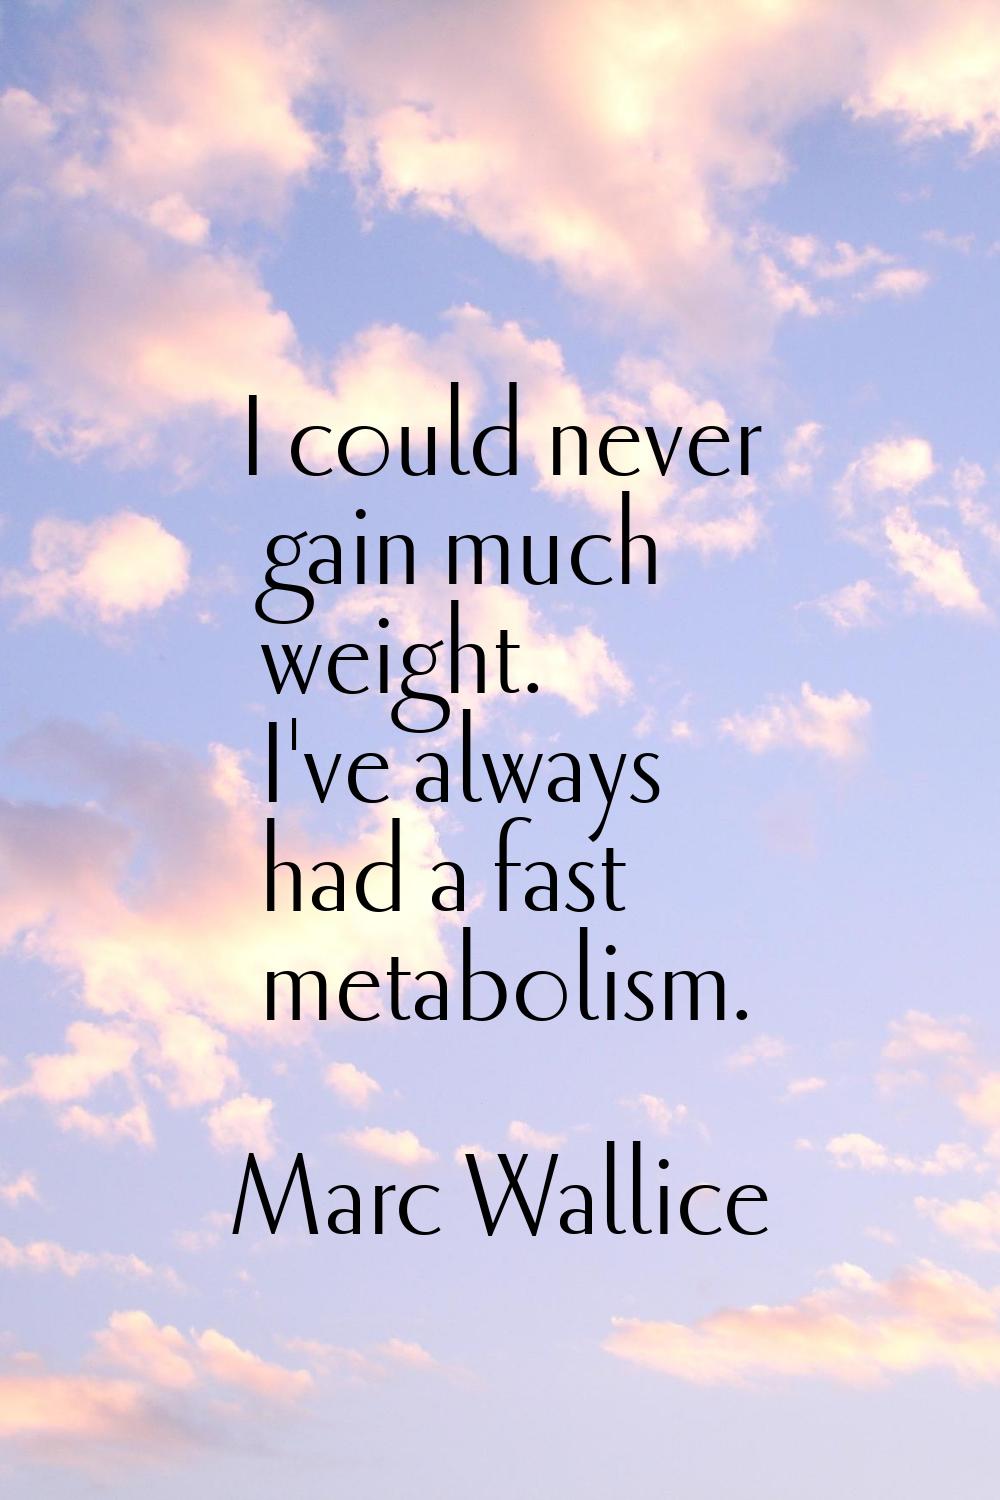 I could never gain much weight. I've always had a fast metabolism.